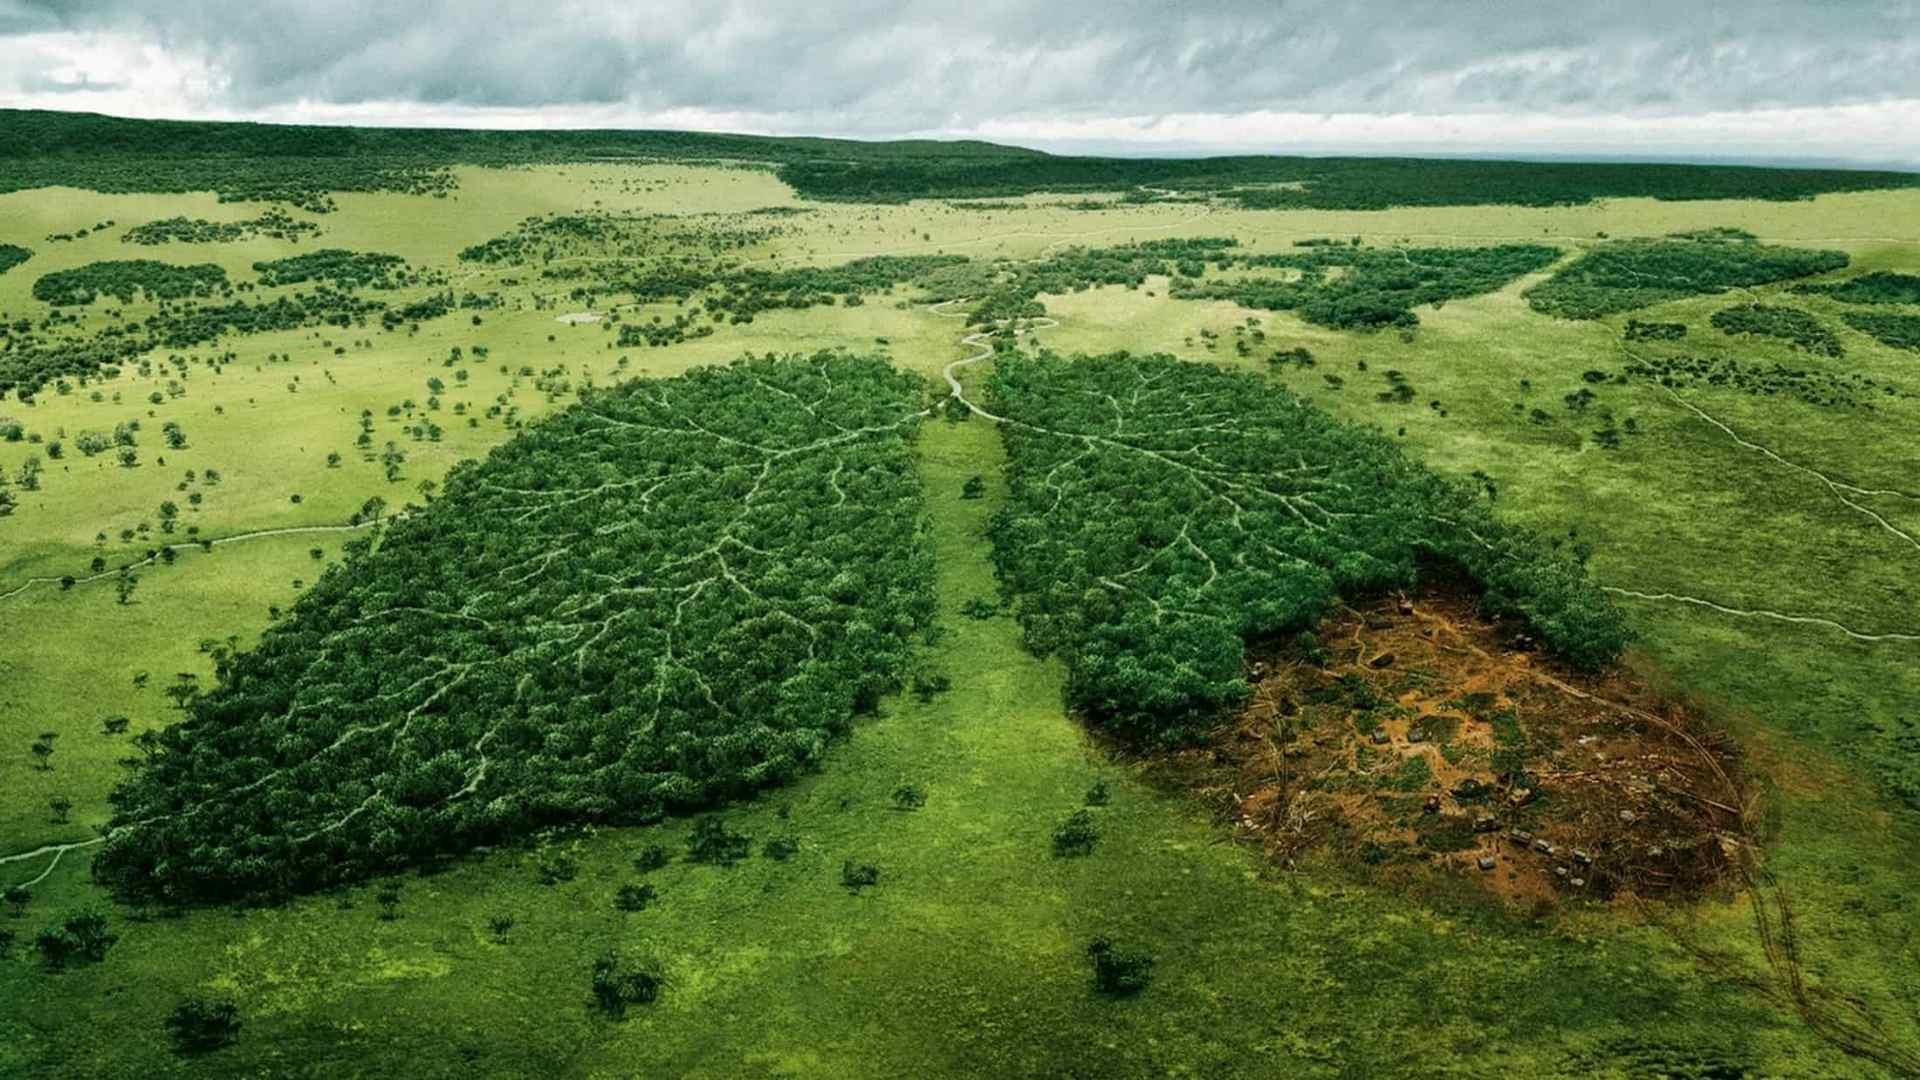 Protecting the environment is protecting people